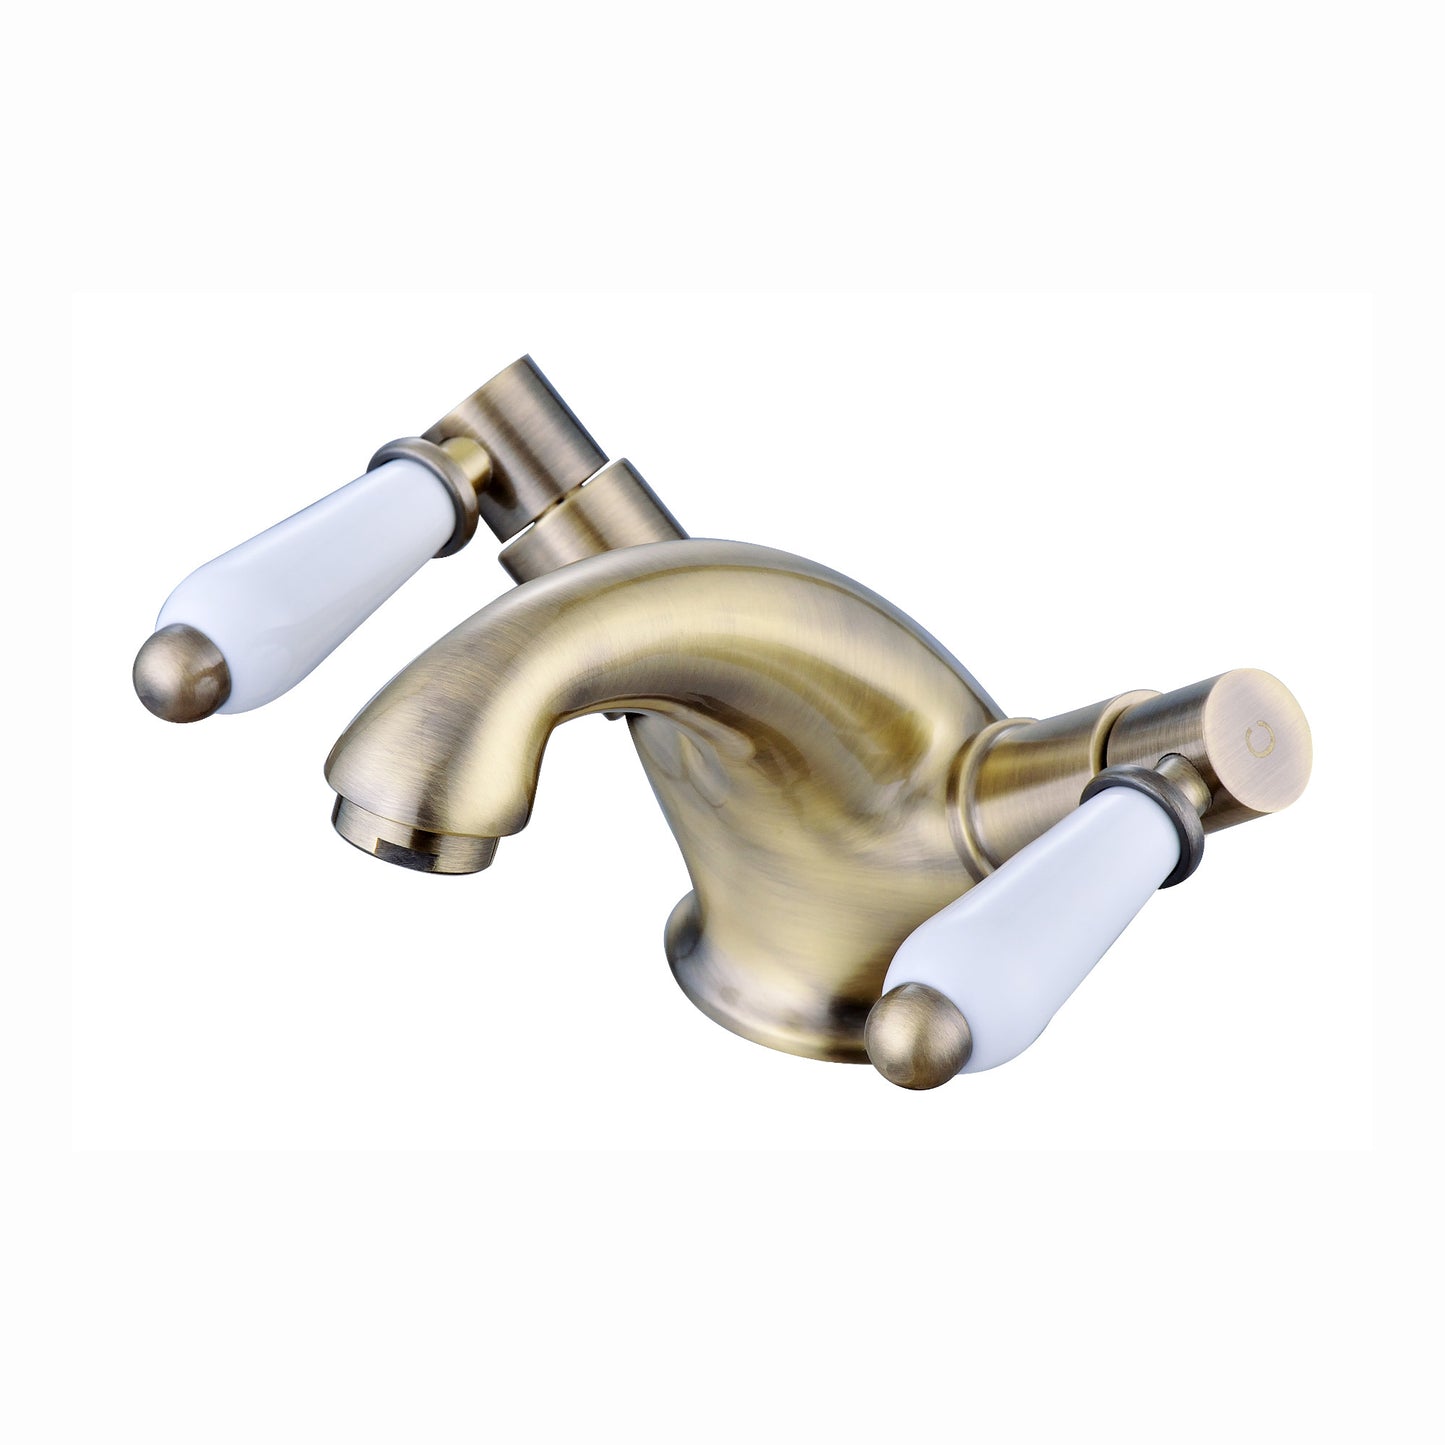 Downton basin mixer tap with white ceramic levers + slotted waste - antique bronze